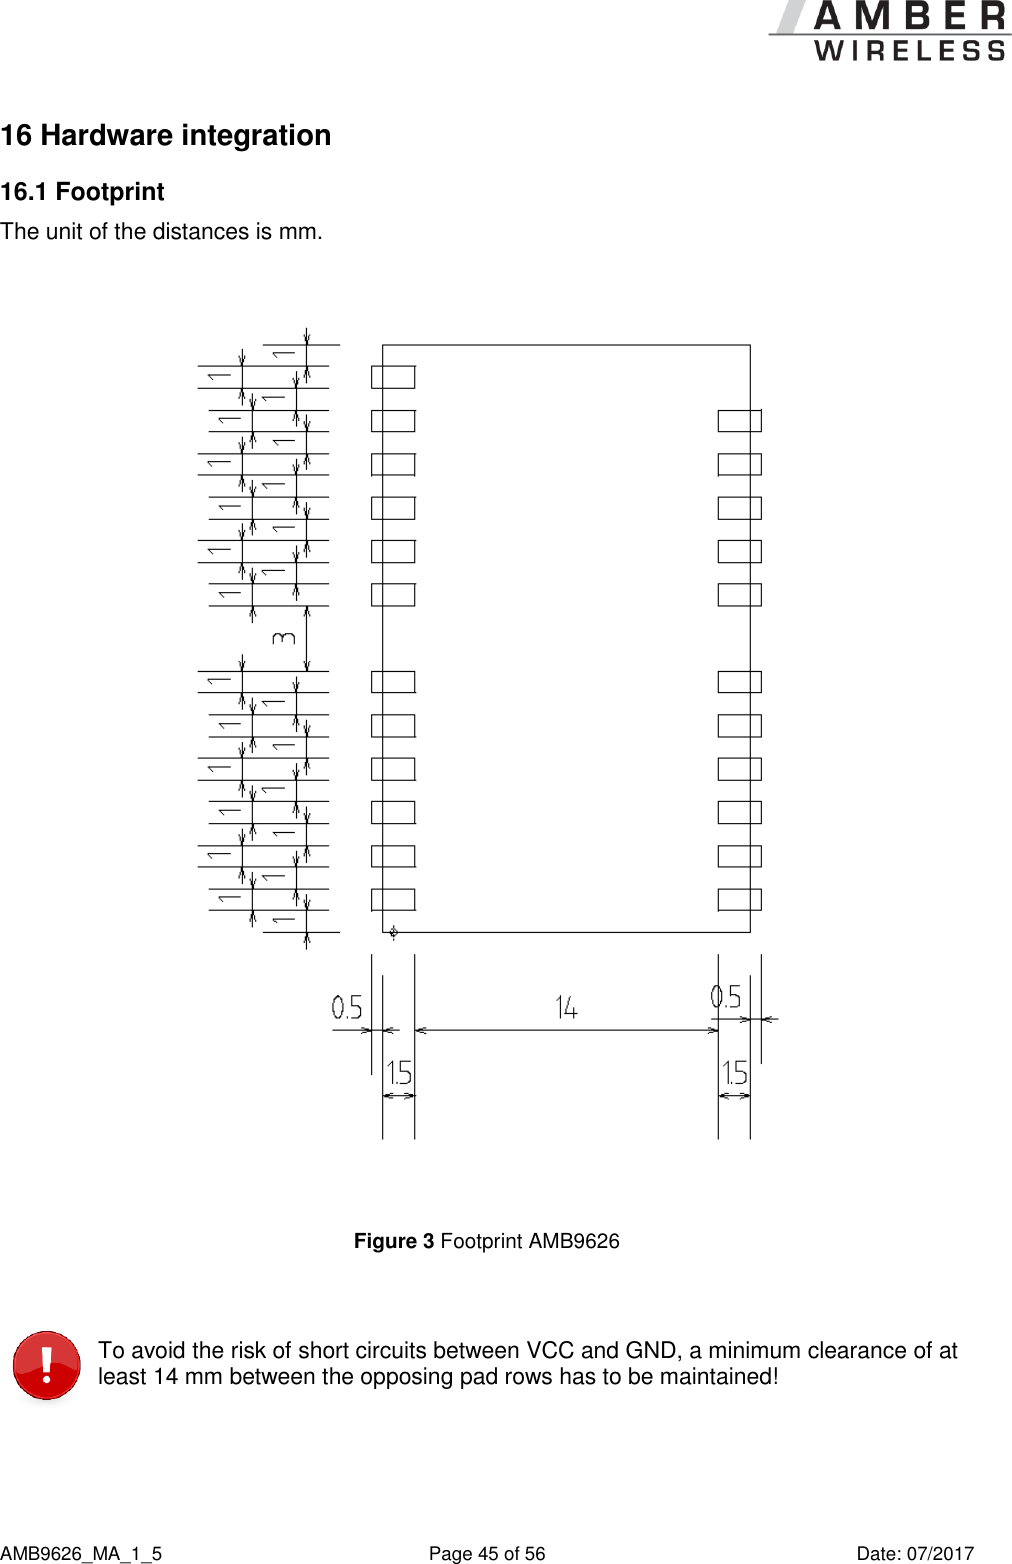      AMB9626_MA_1_5  Page 45 of 56  Date: 07/2017 16 Hardware integration 16.1 Footprint The unit of the distances is mm.  Figure 3 Footprint AMB9626   To avoid the risk of short circuits between VCC and GND, a minimum clearance of at least 14 mm between the opposing pad rows has to be maintained!  